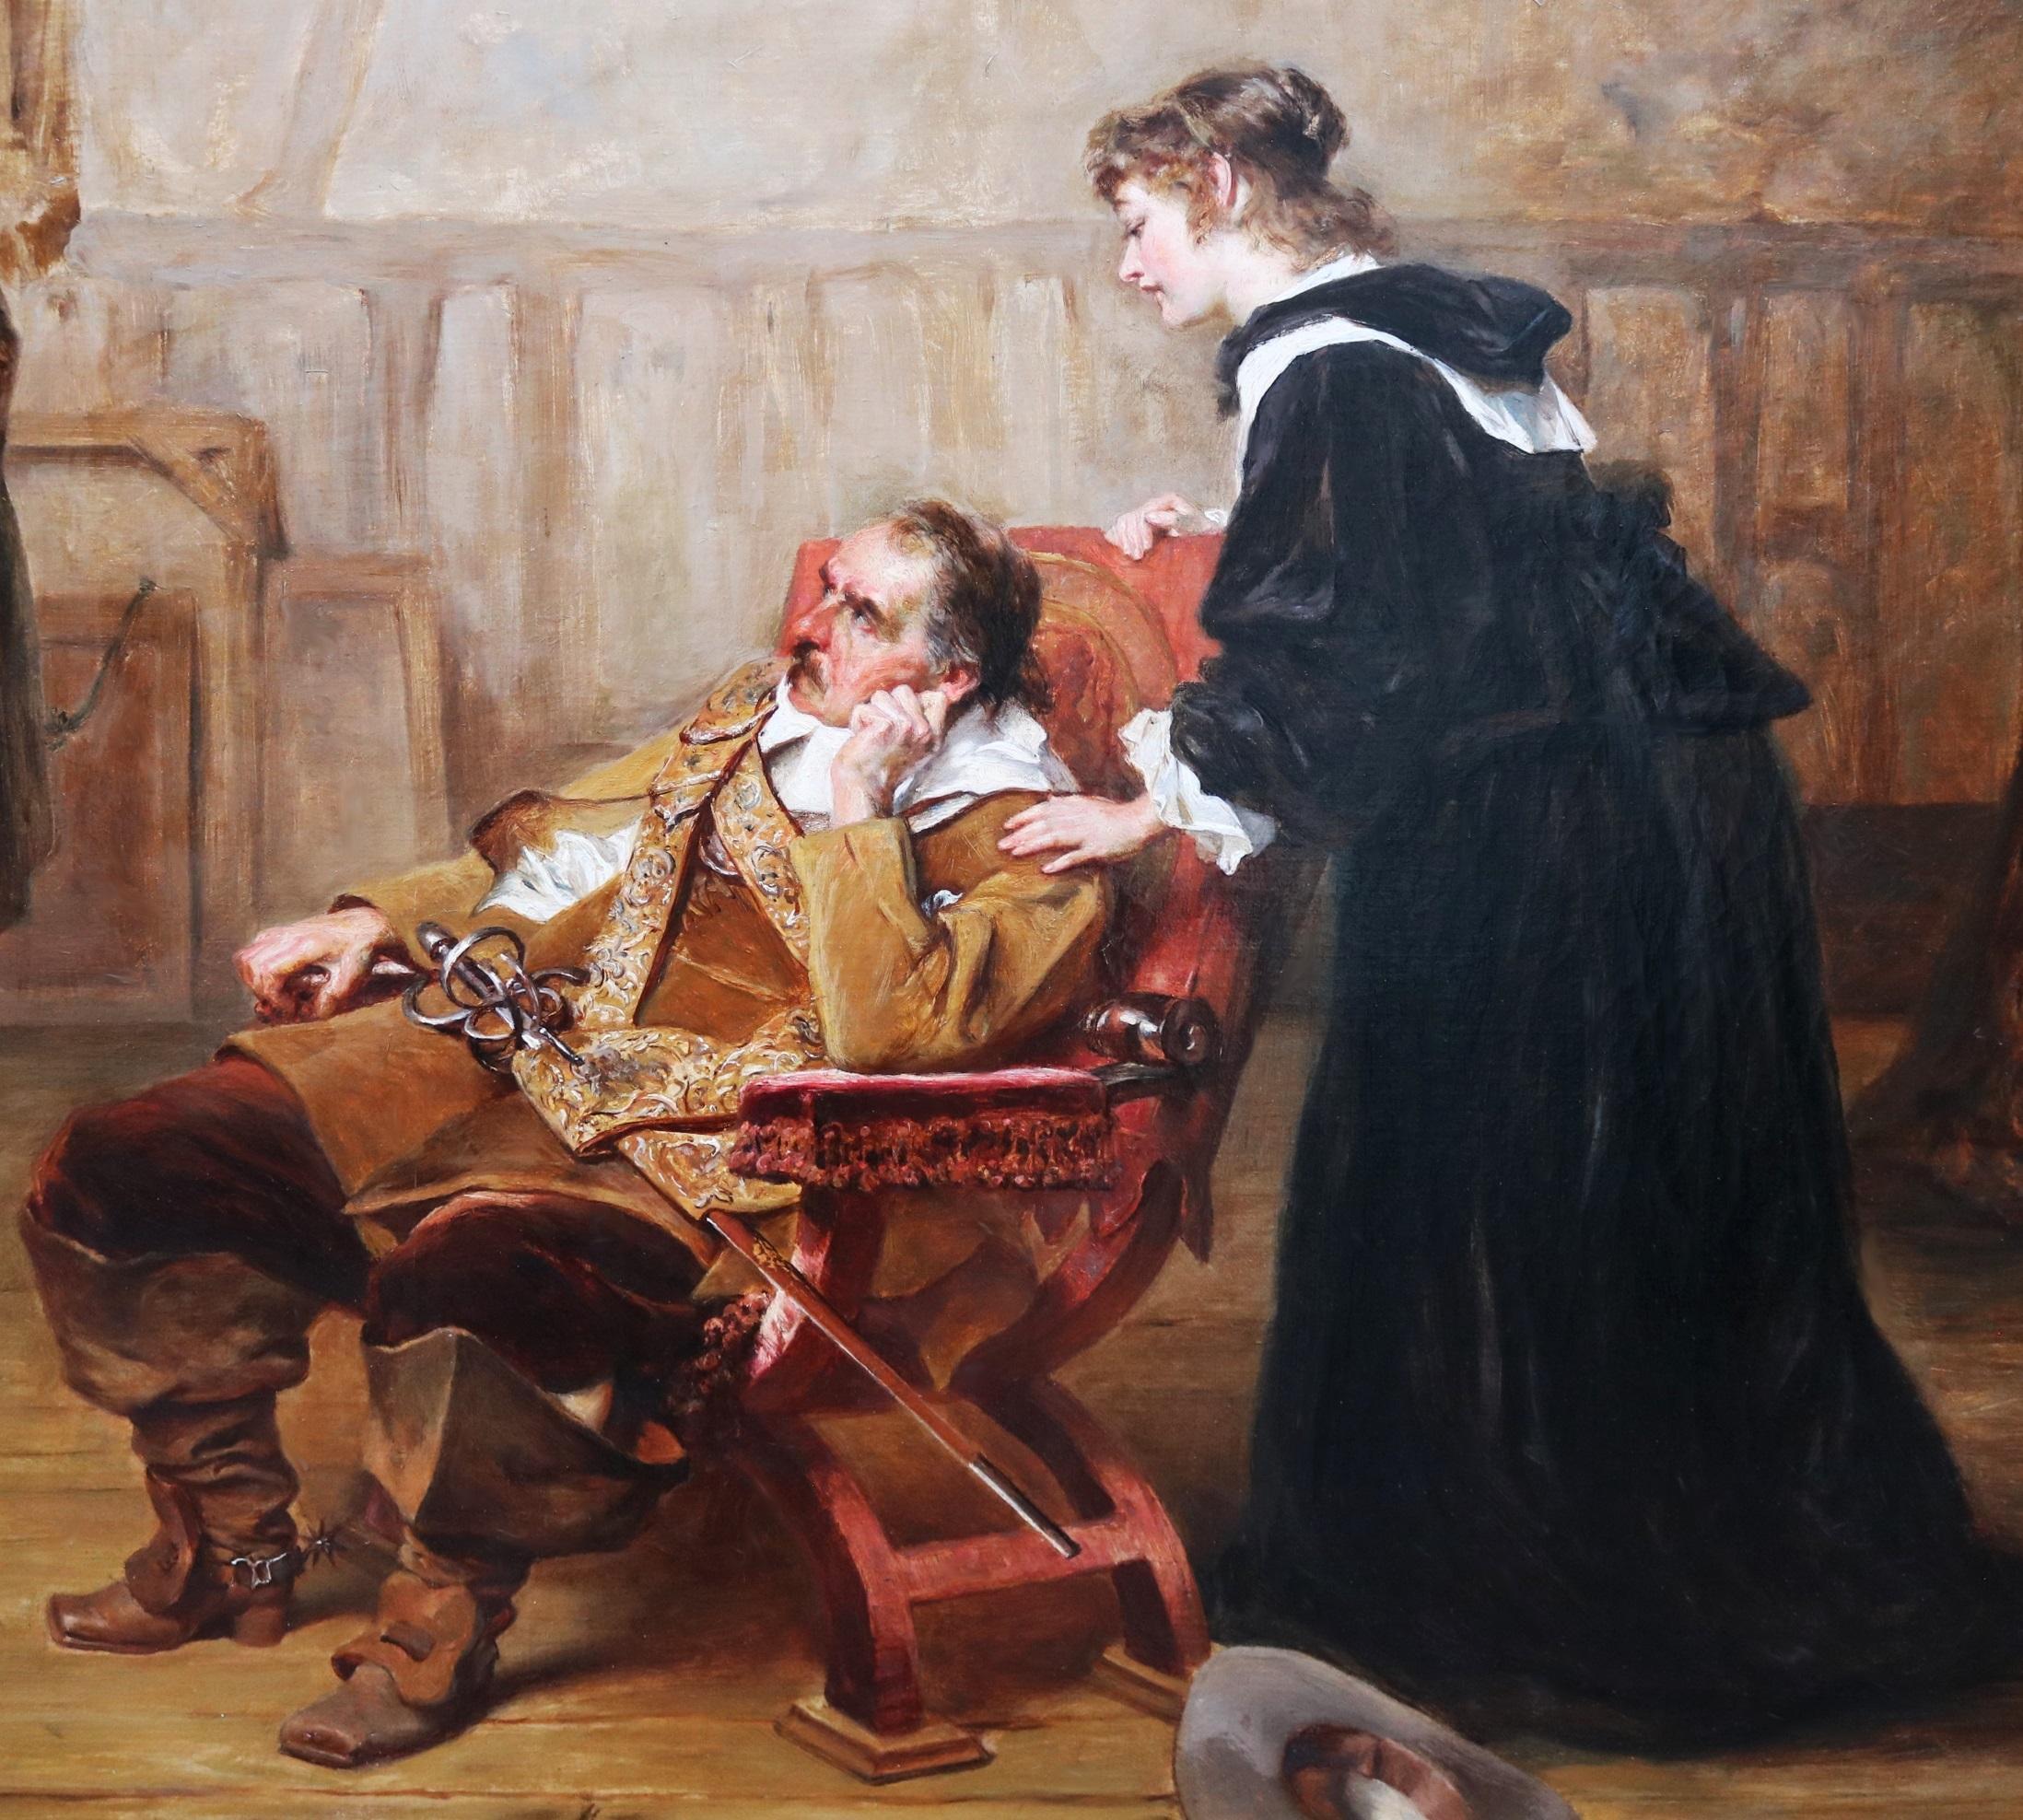 An Awful Deed’ by Robert Alexander Hillingford (1828-1904). The painting – which depicts Oliver Cromwell contemplating Anthony van Dyck’s portrait of King Charles I – is signed by the artist and dated 1885. The subject is inspired by a scene in Sir